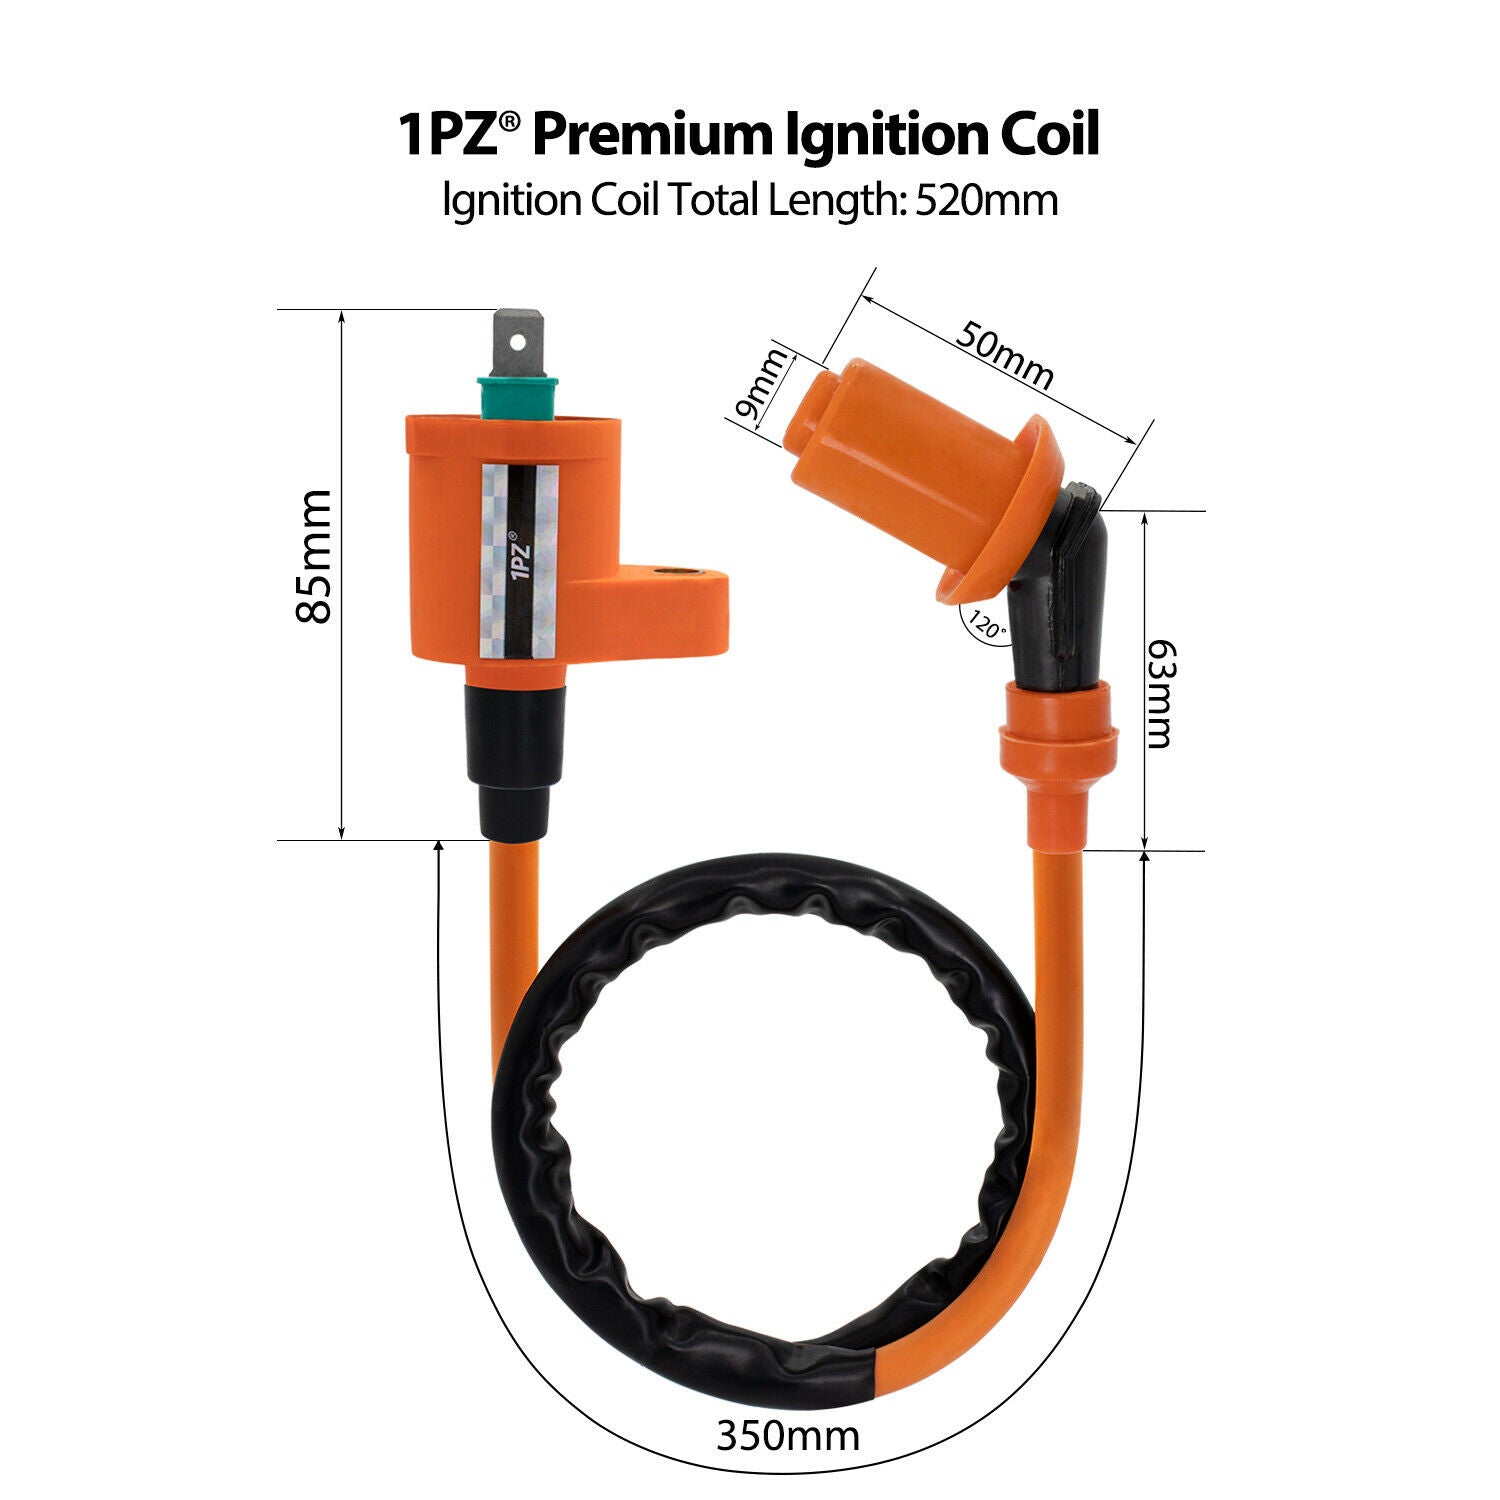 1PZ Racing CDI Ignition Coil Spark Plug Replacement for Honda Xr Crf Crf50 Xr50 Xr70 Xr80 Xr100